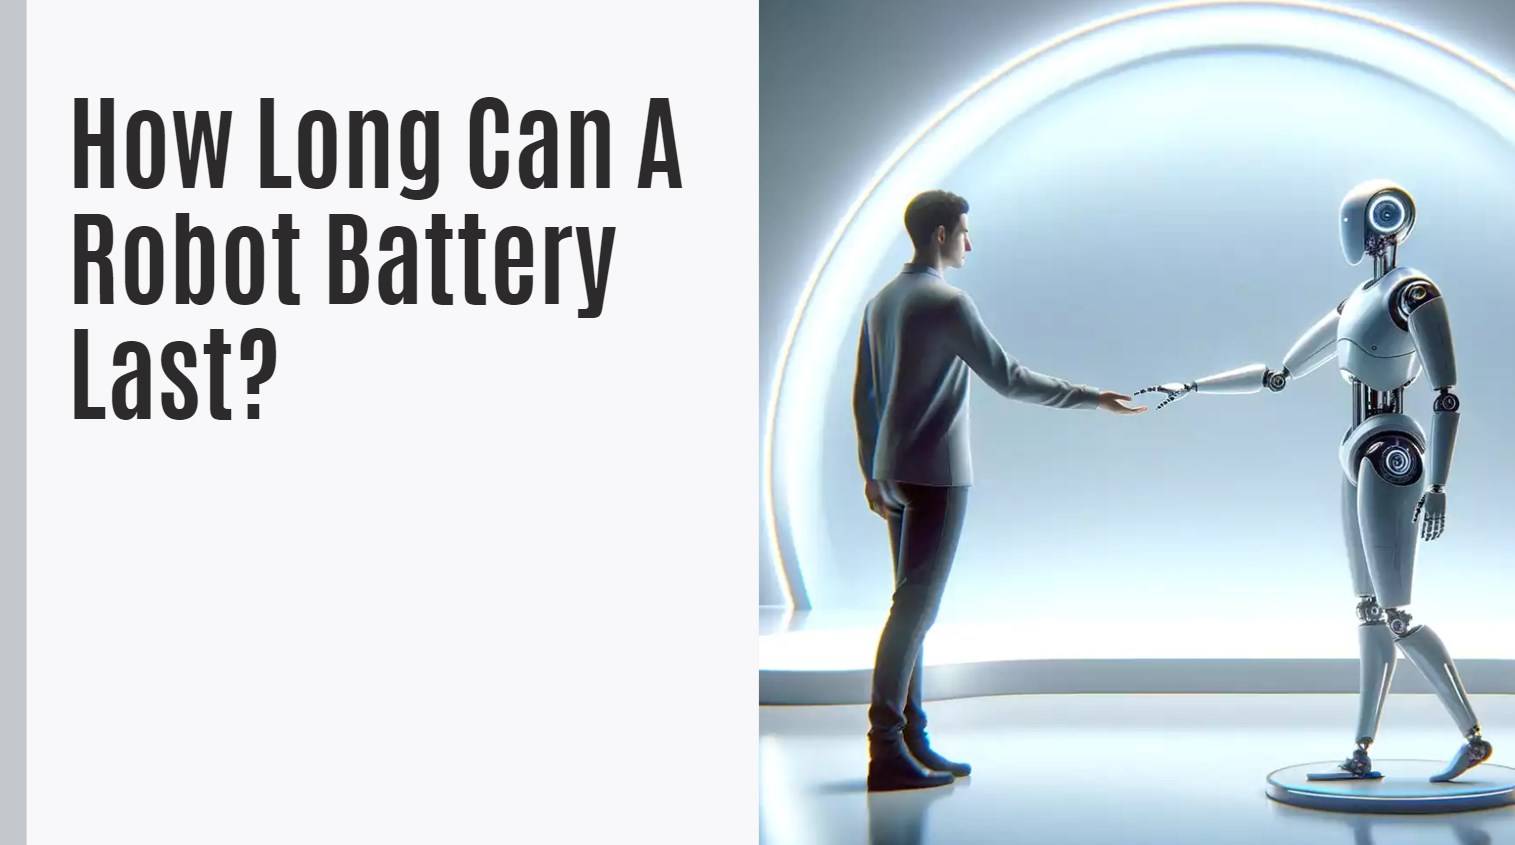 How Long Can A Robot Battery Last?